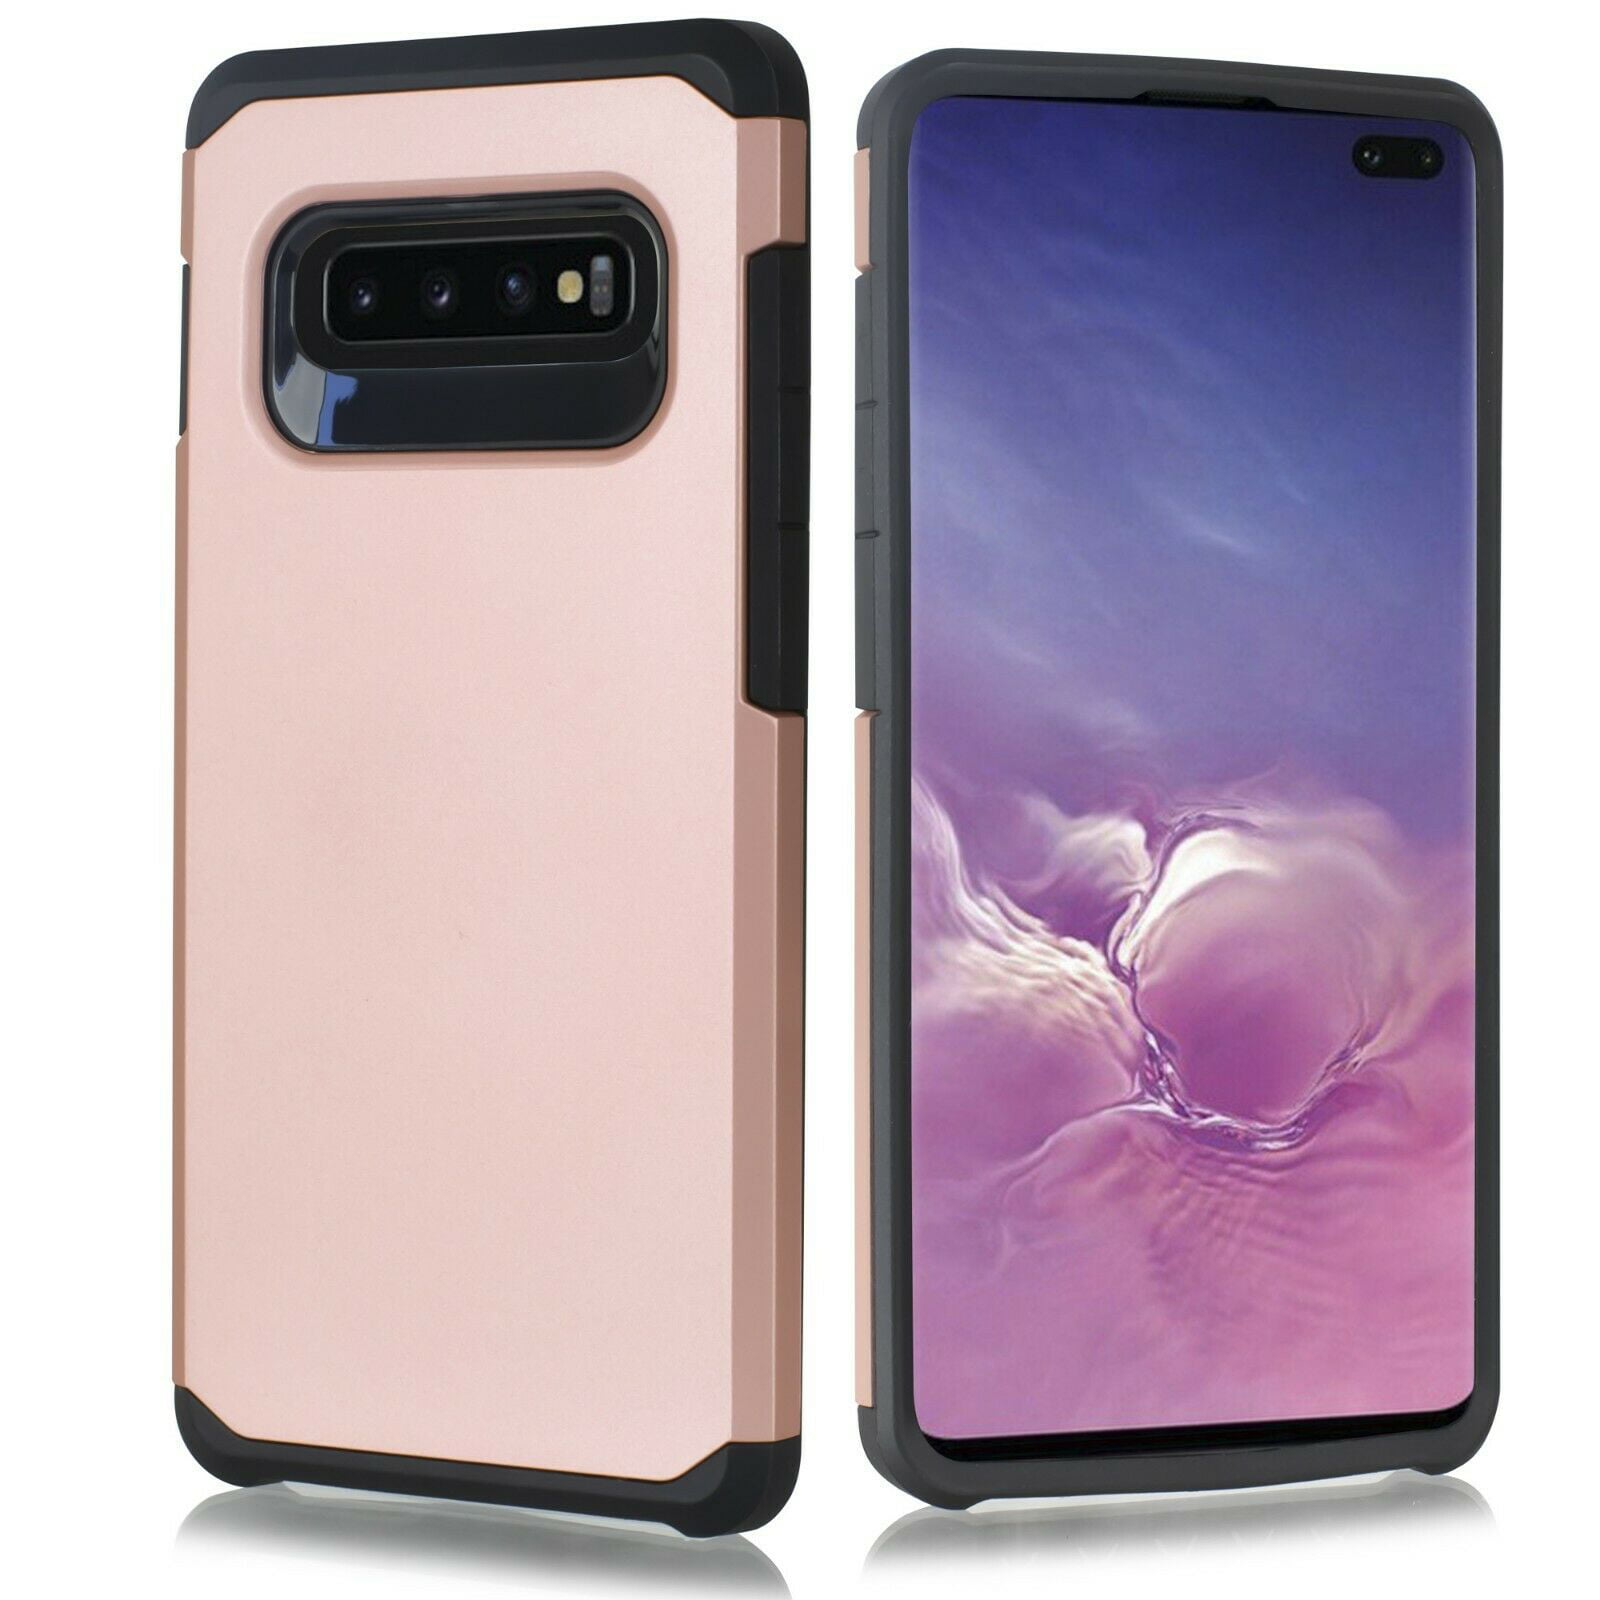 Case For Samsung Galaxy S10 Plus S10e S10+ Cover Simple Love Heart Soft TPU  Back Protection Slim Case For GalaxyS10 S10Plus Capa